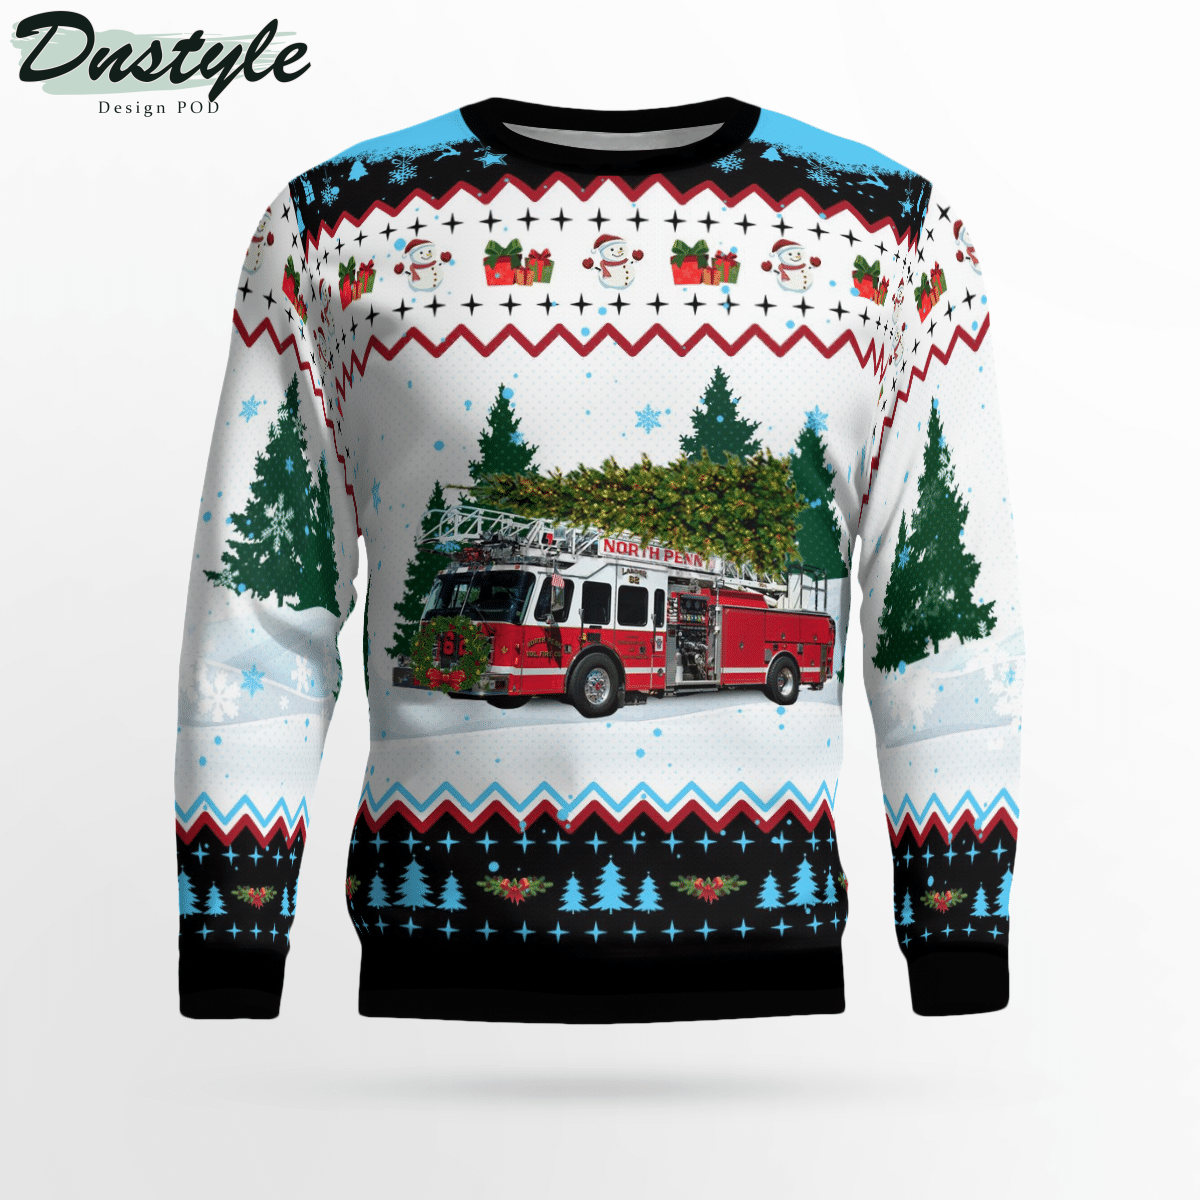 North Penn Volunteer Fire Company Ugly Christmas Sweater